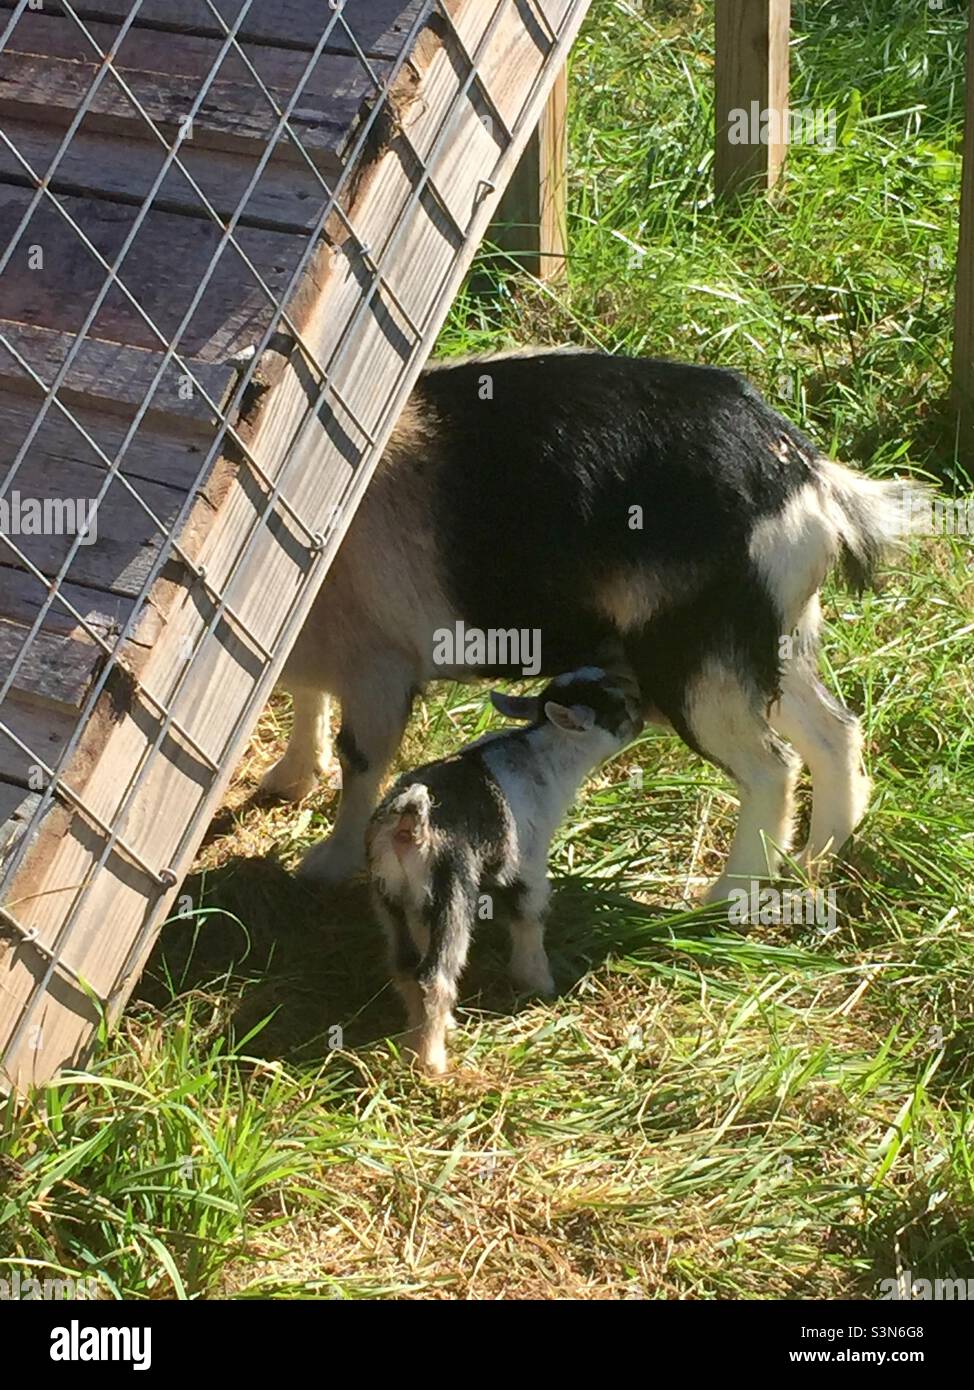 Mother goat with Baby goat nursing Stock Photo